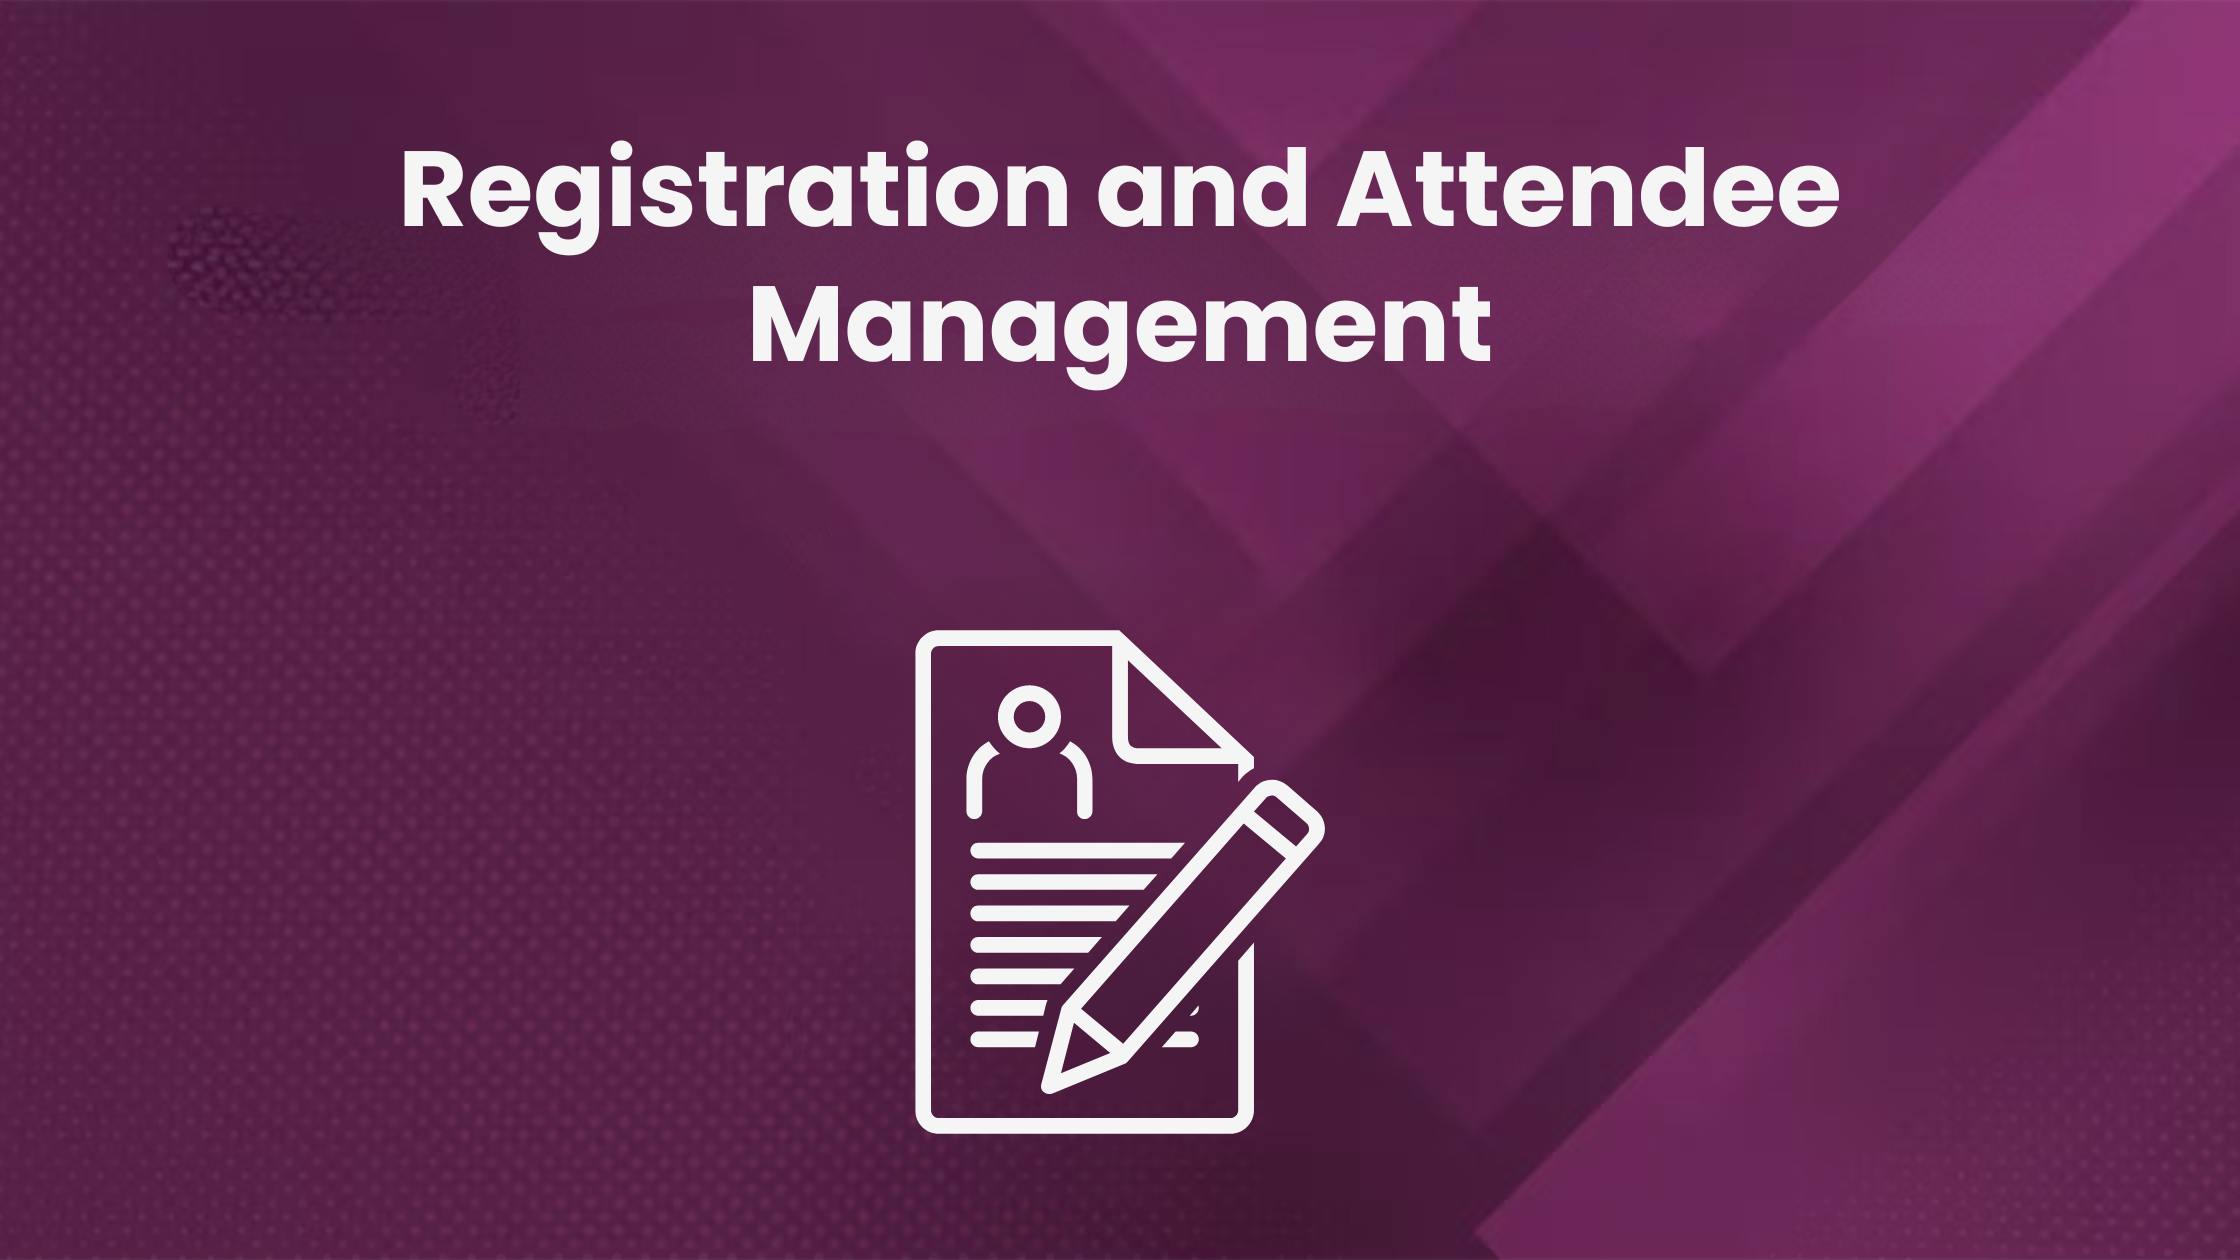 Registration and attendee management